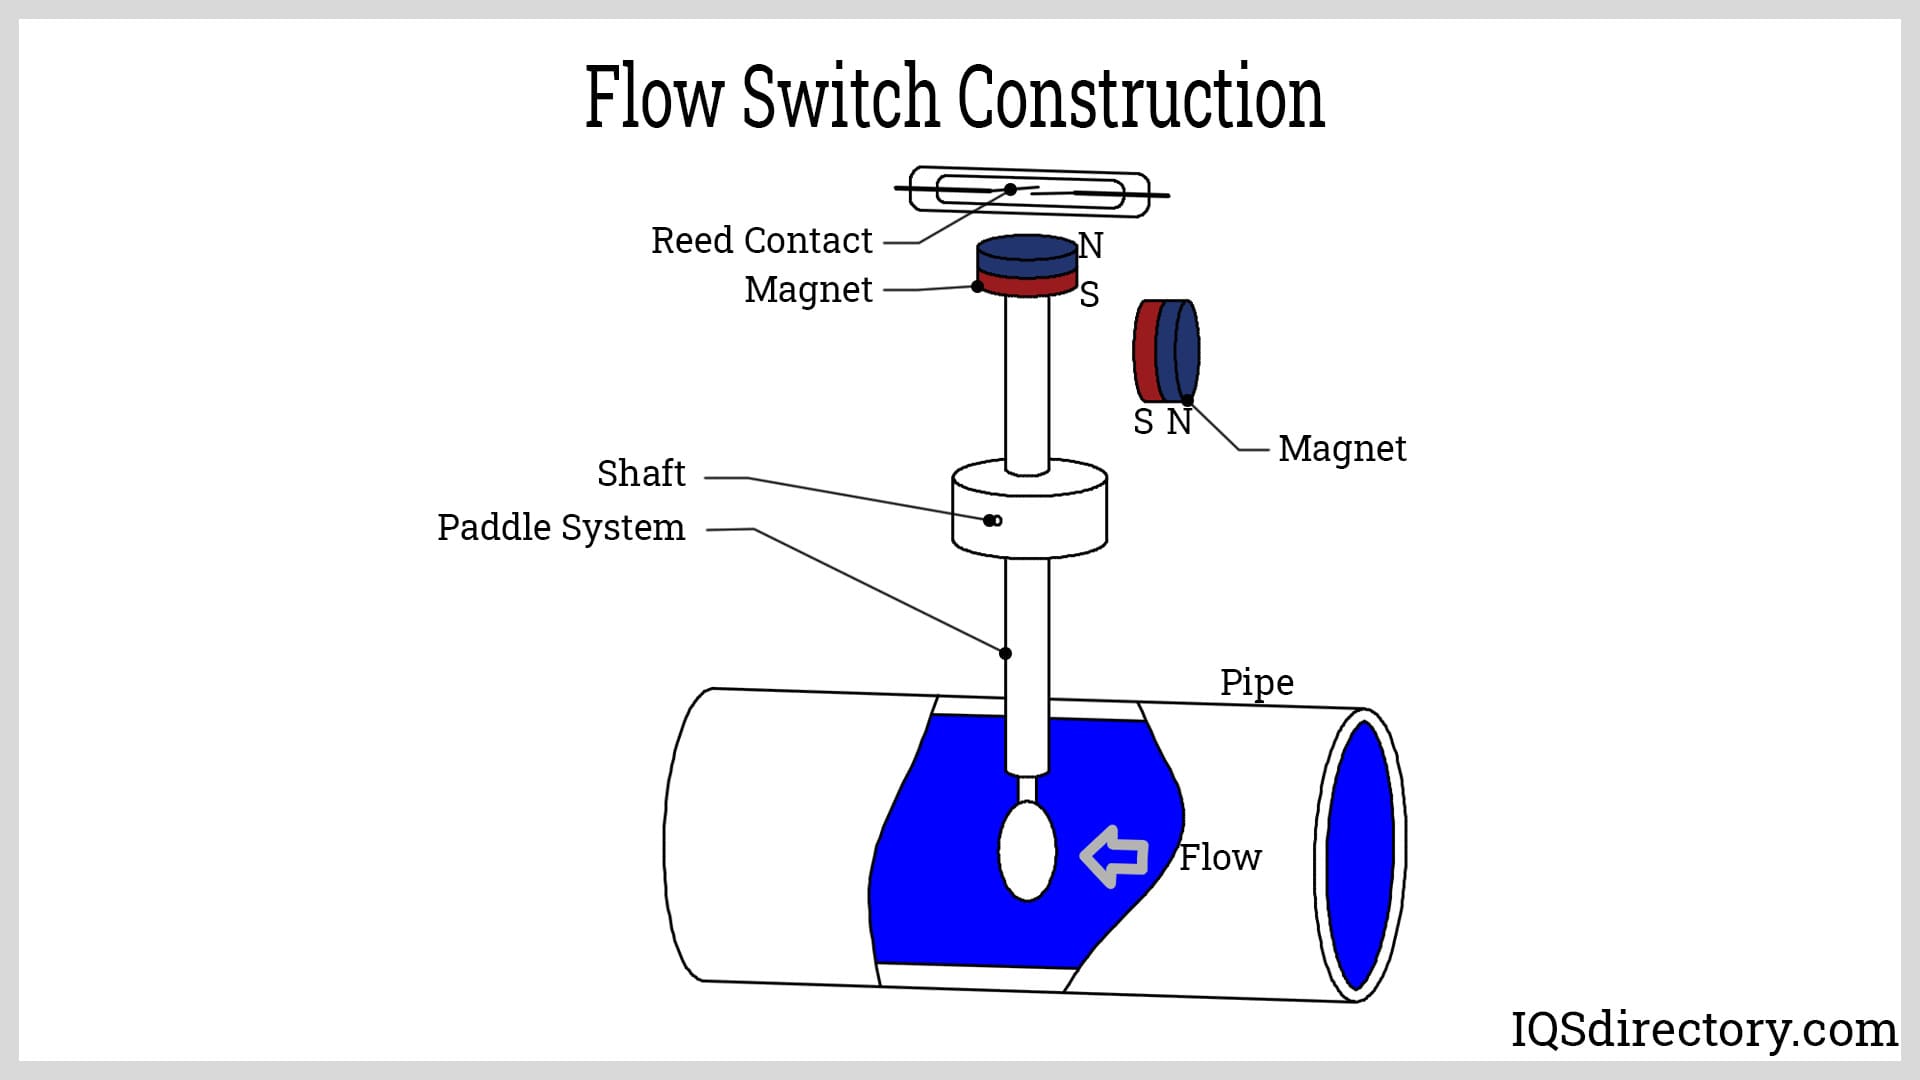 how does a flow switch work